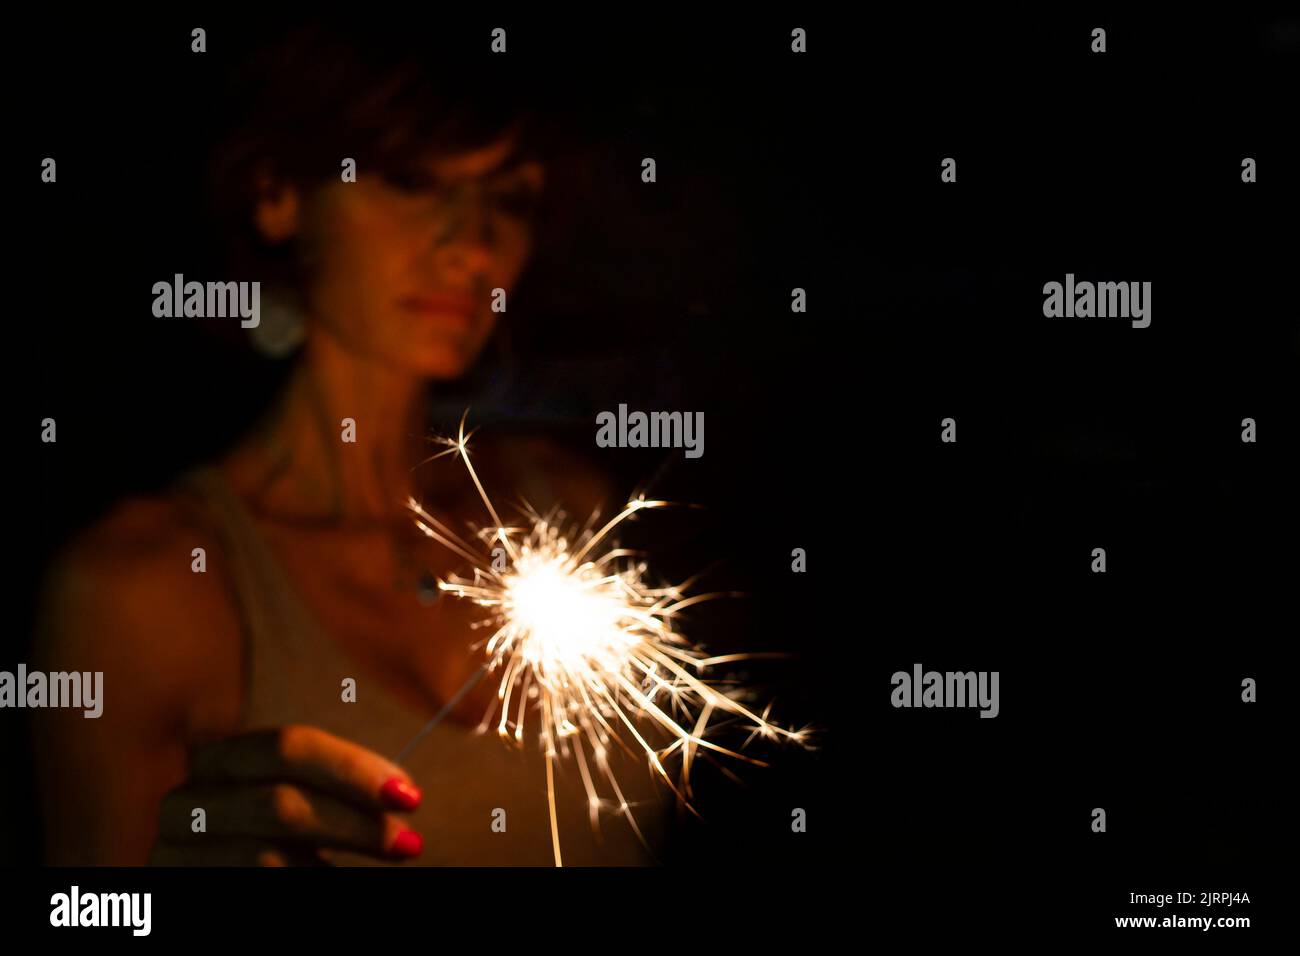 Attractive  caucasian woman, blurred face, holding a burning sparkler or bengal in the dark. Copy space. Holidays or magic background or wallpaper. Stock Photo